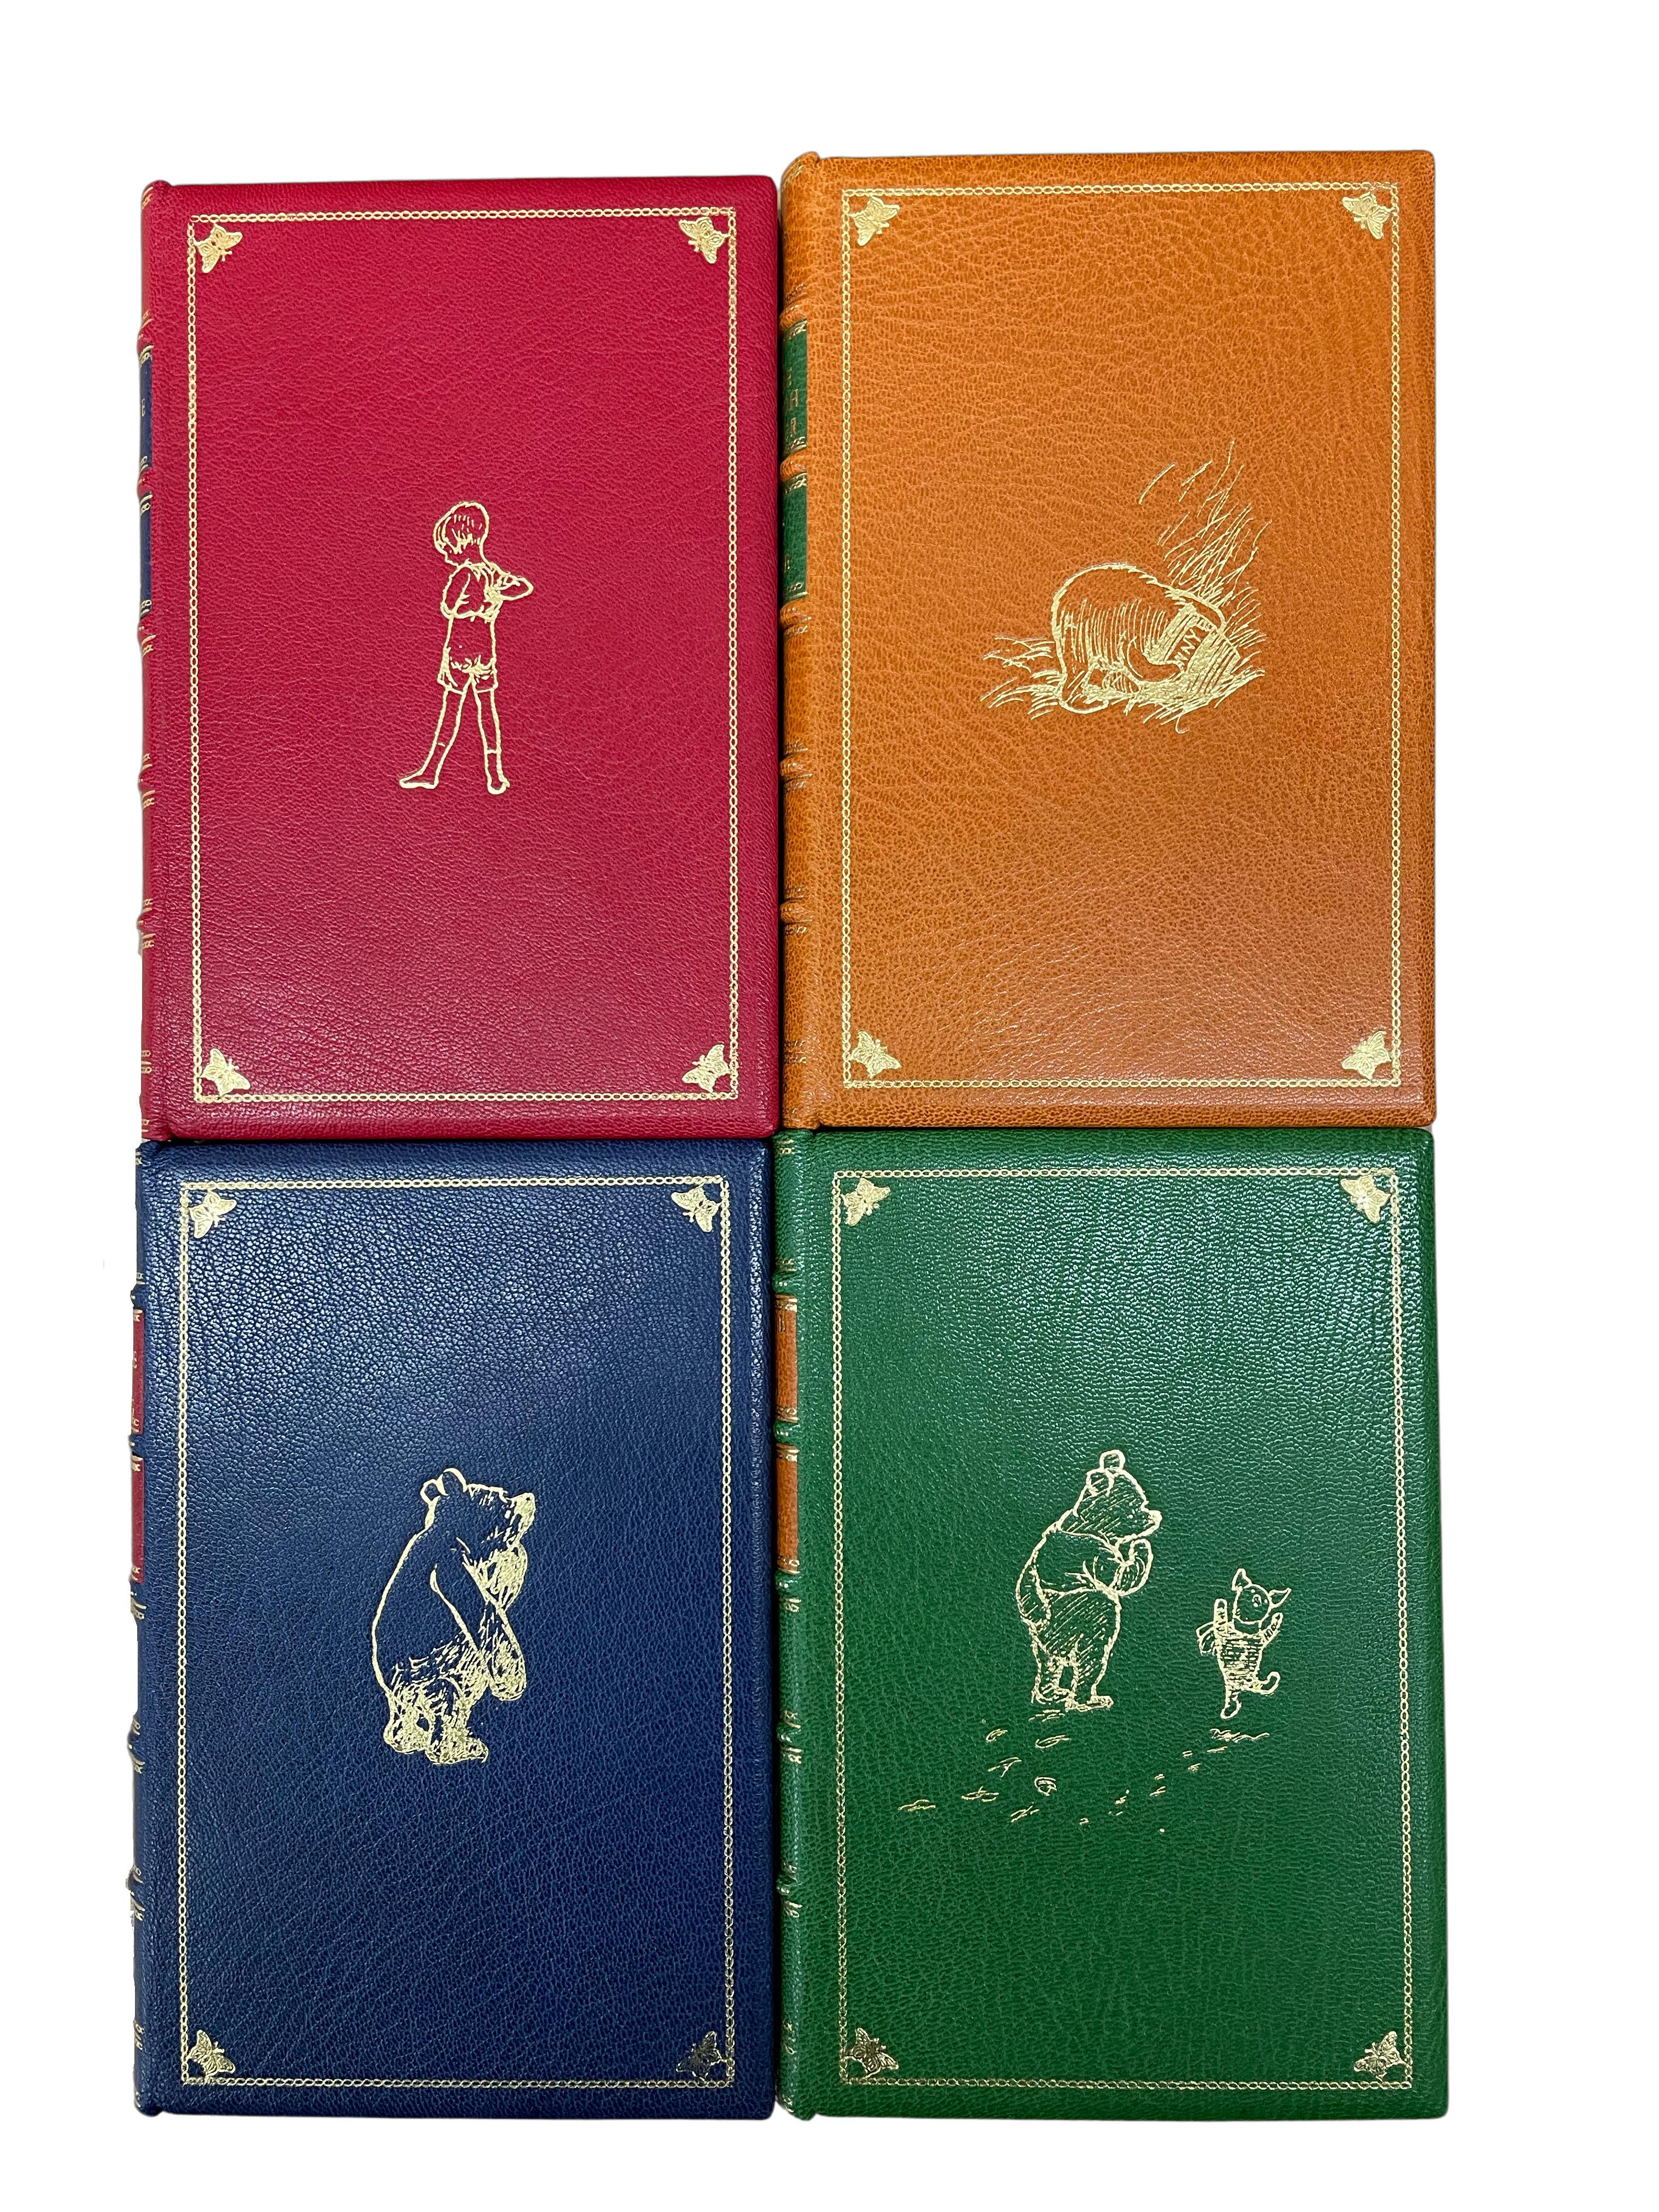 winnie the pooh deluxe edition